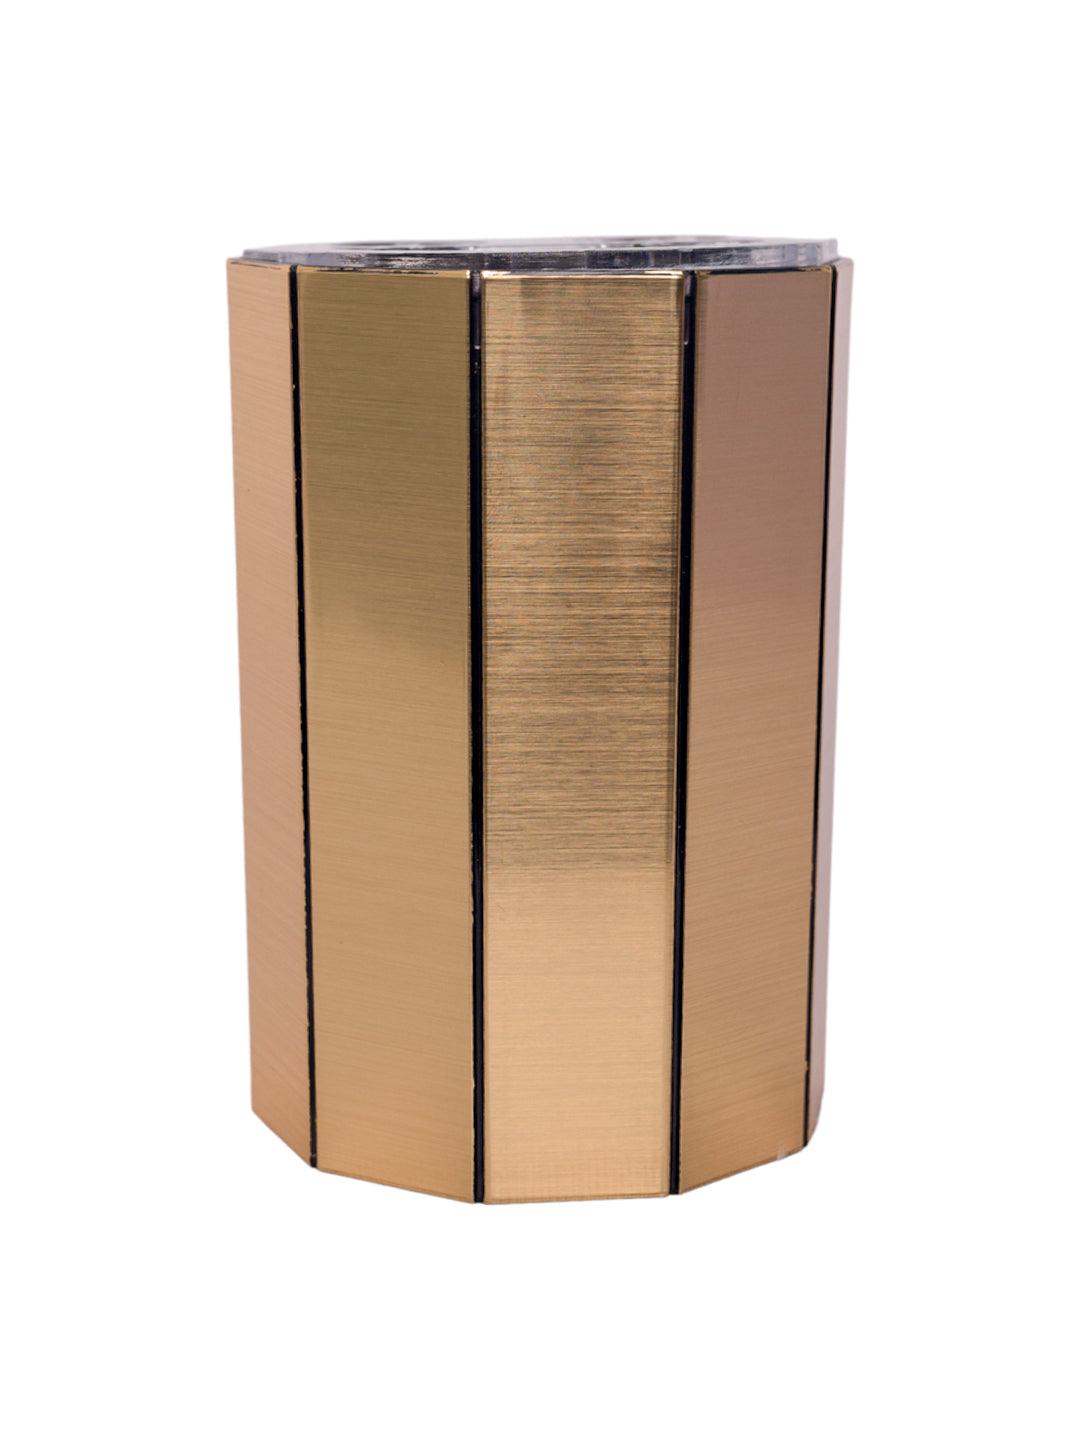 Buy Stylish Tooth Brush Holder - Golden at the best price on